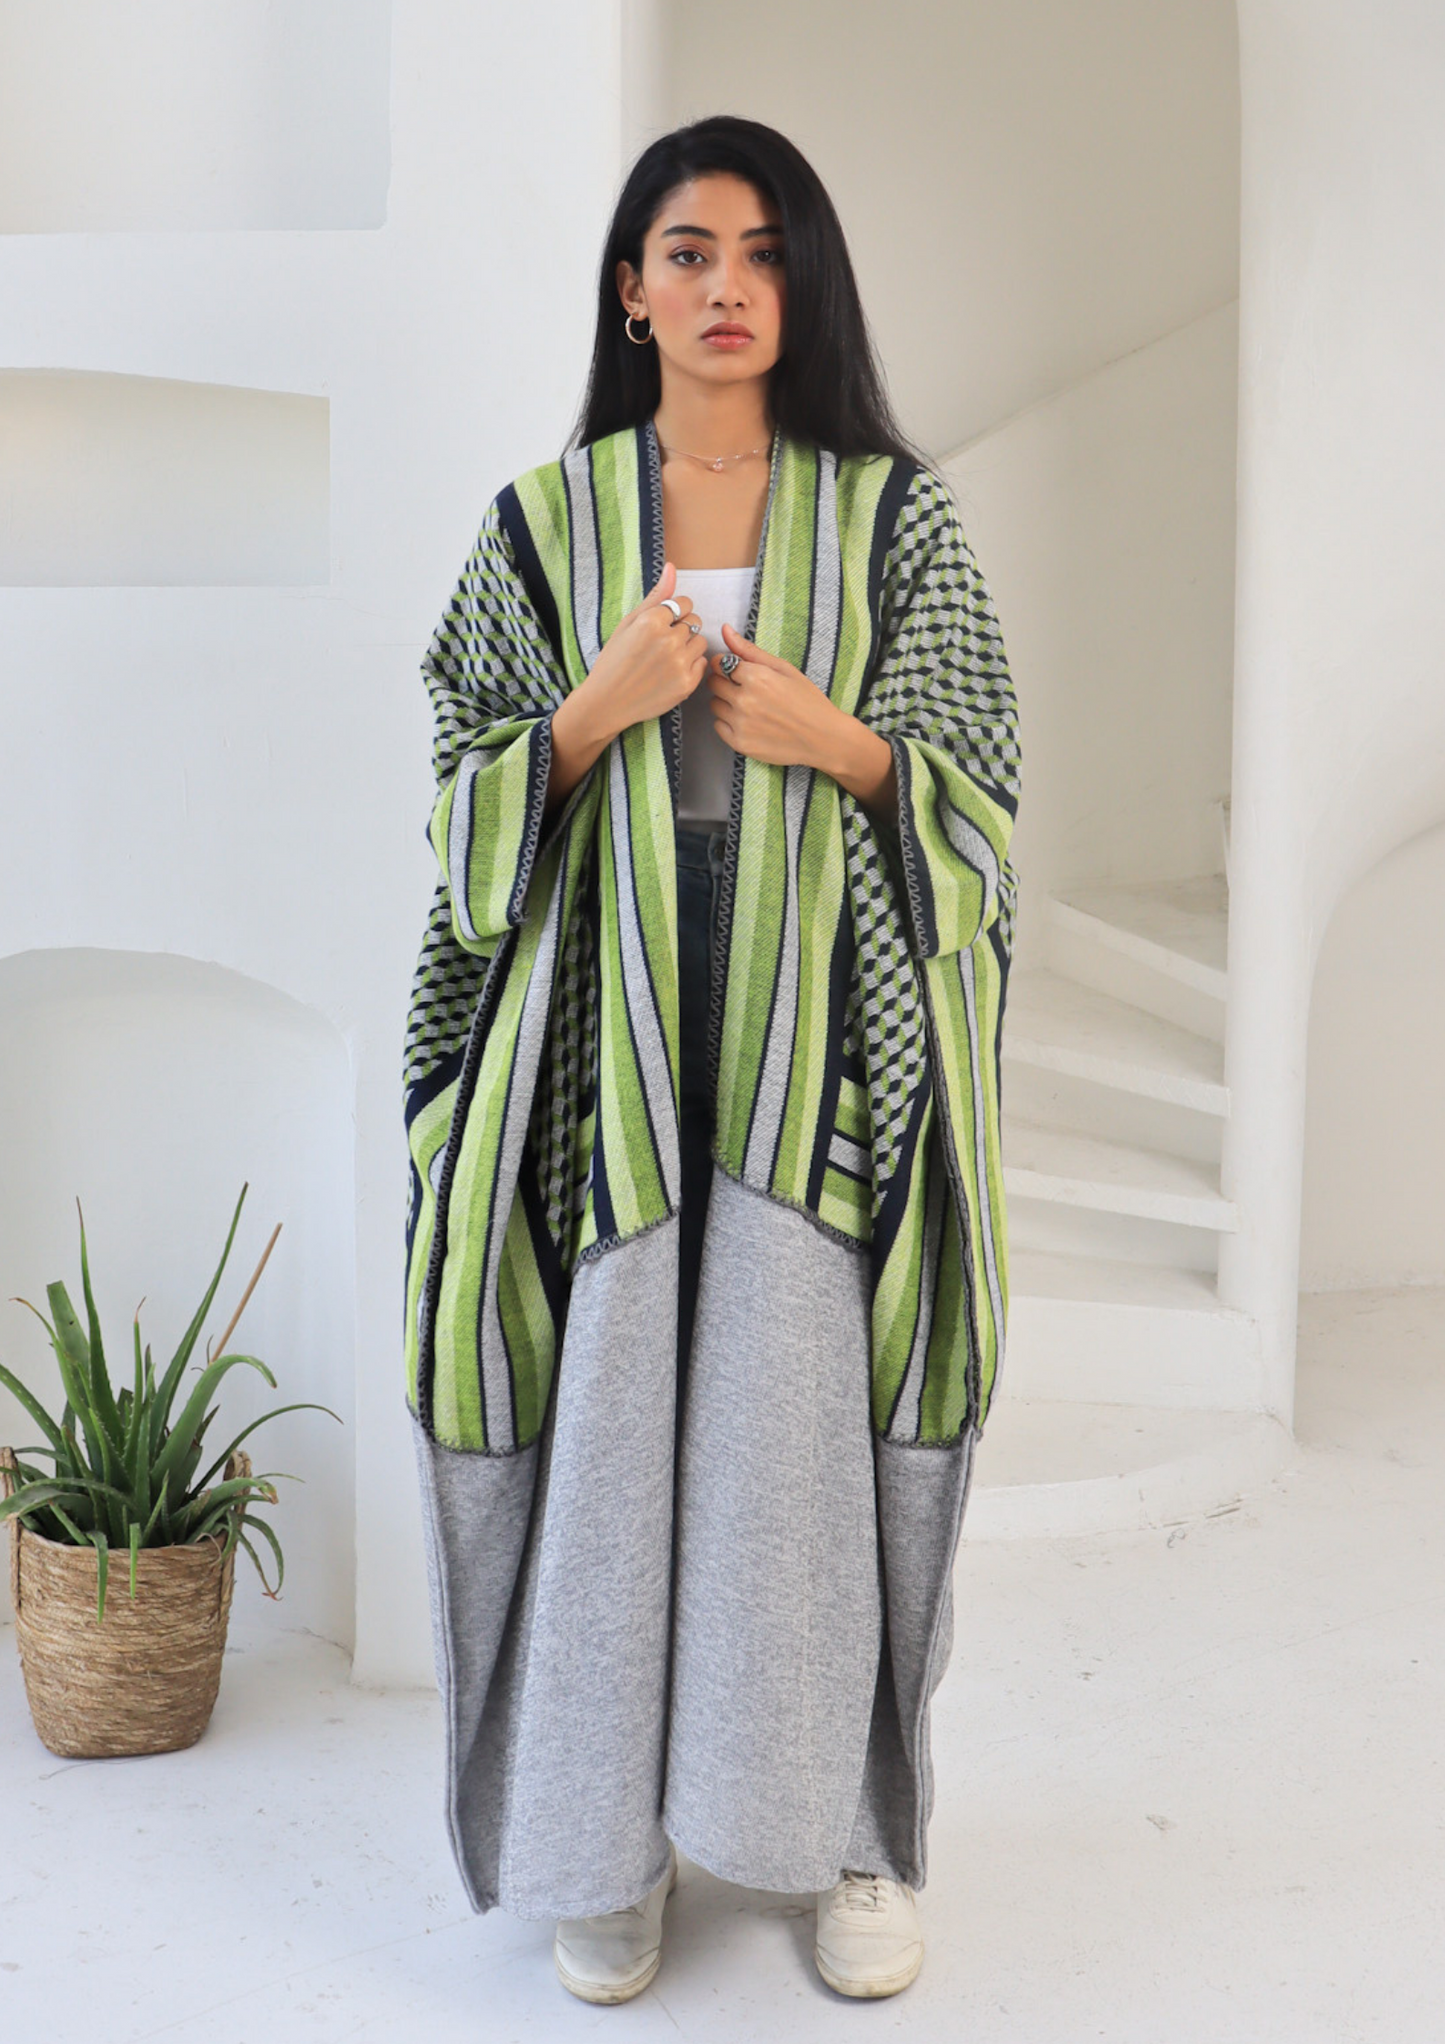 Tropical Winter - Freeflow Cover Up - Online Shopping - The Untitled Project